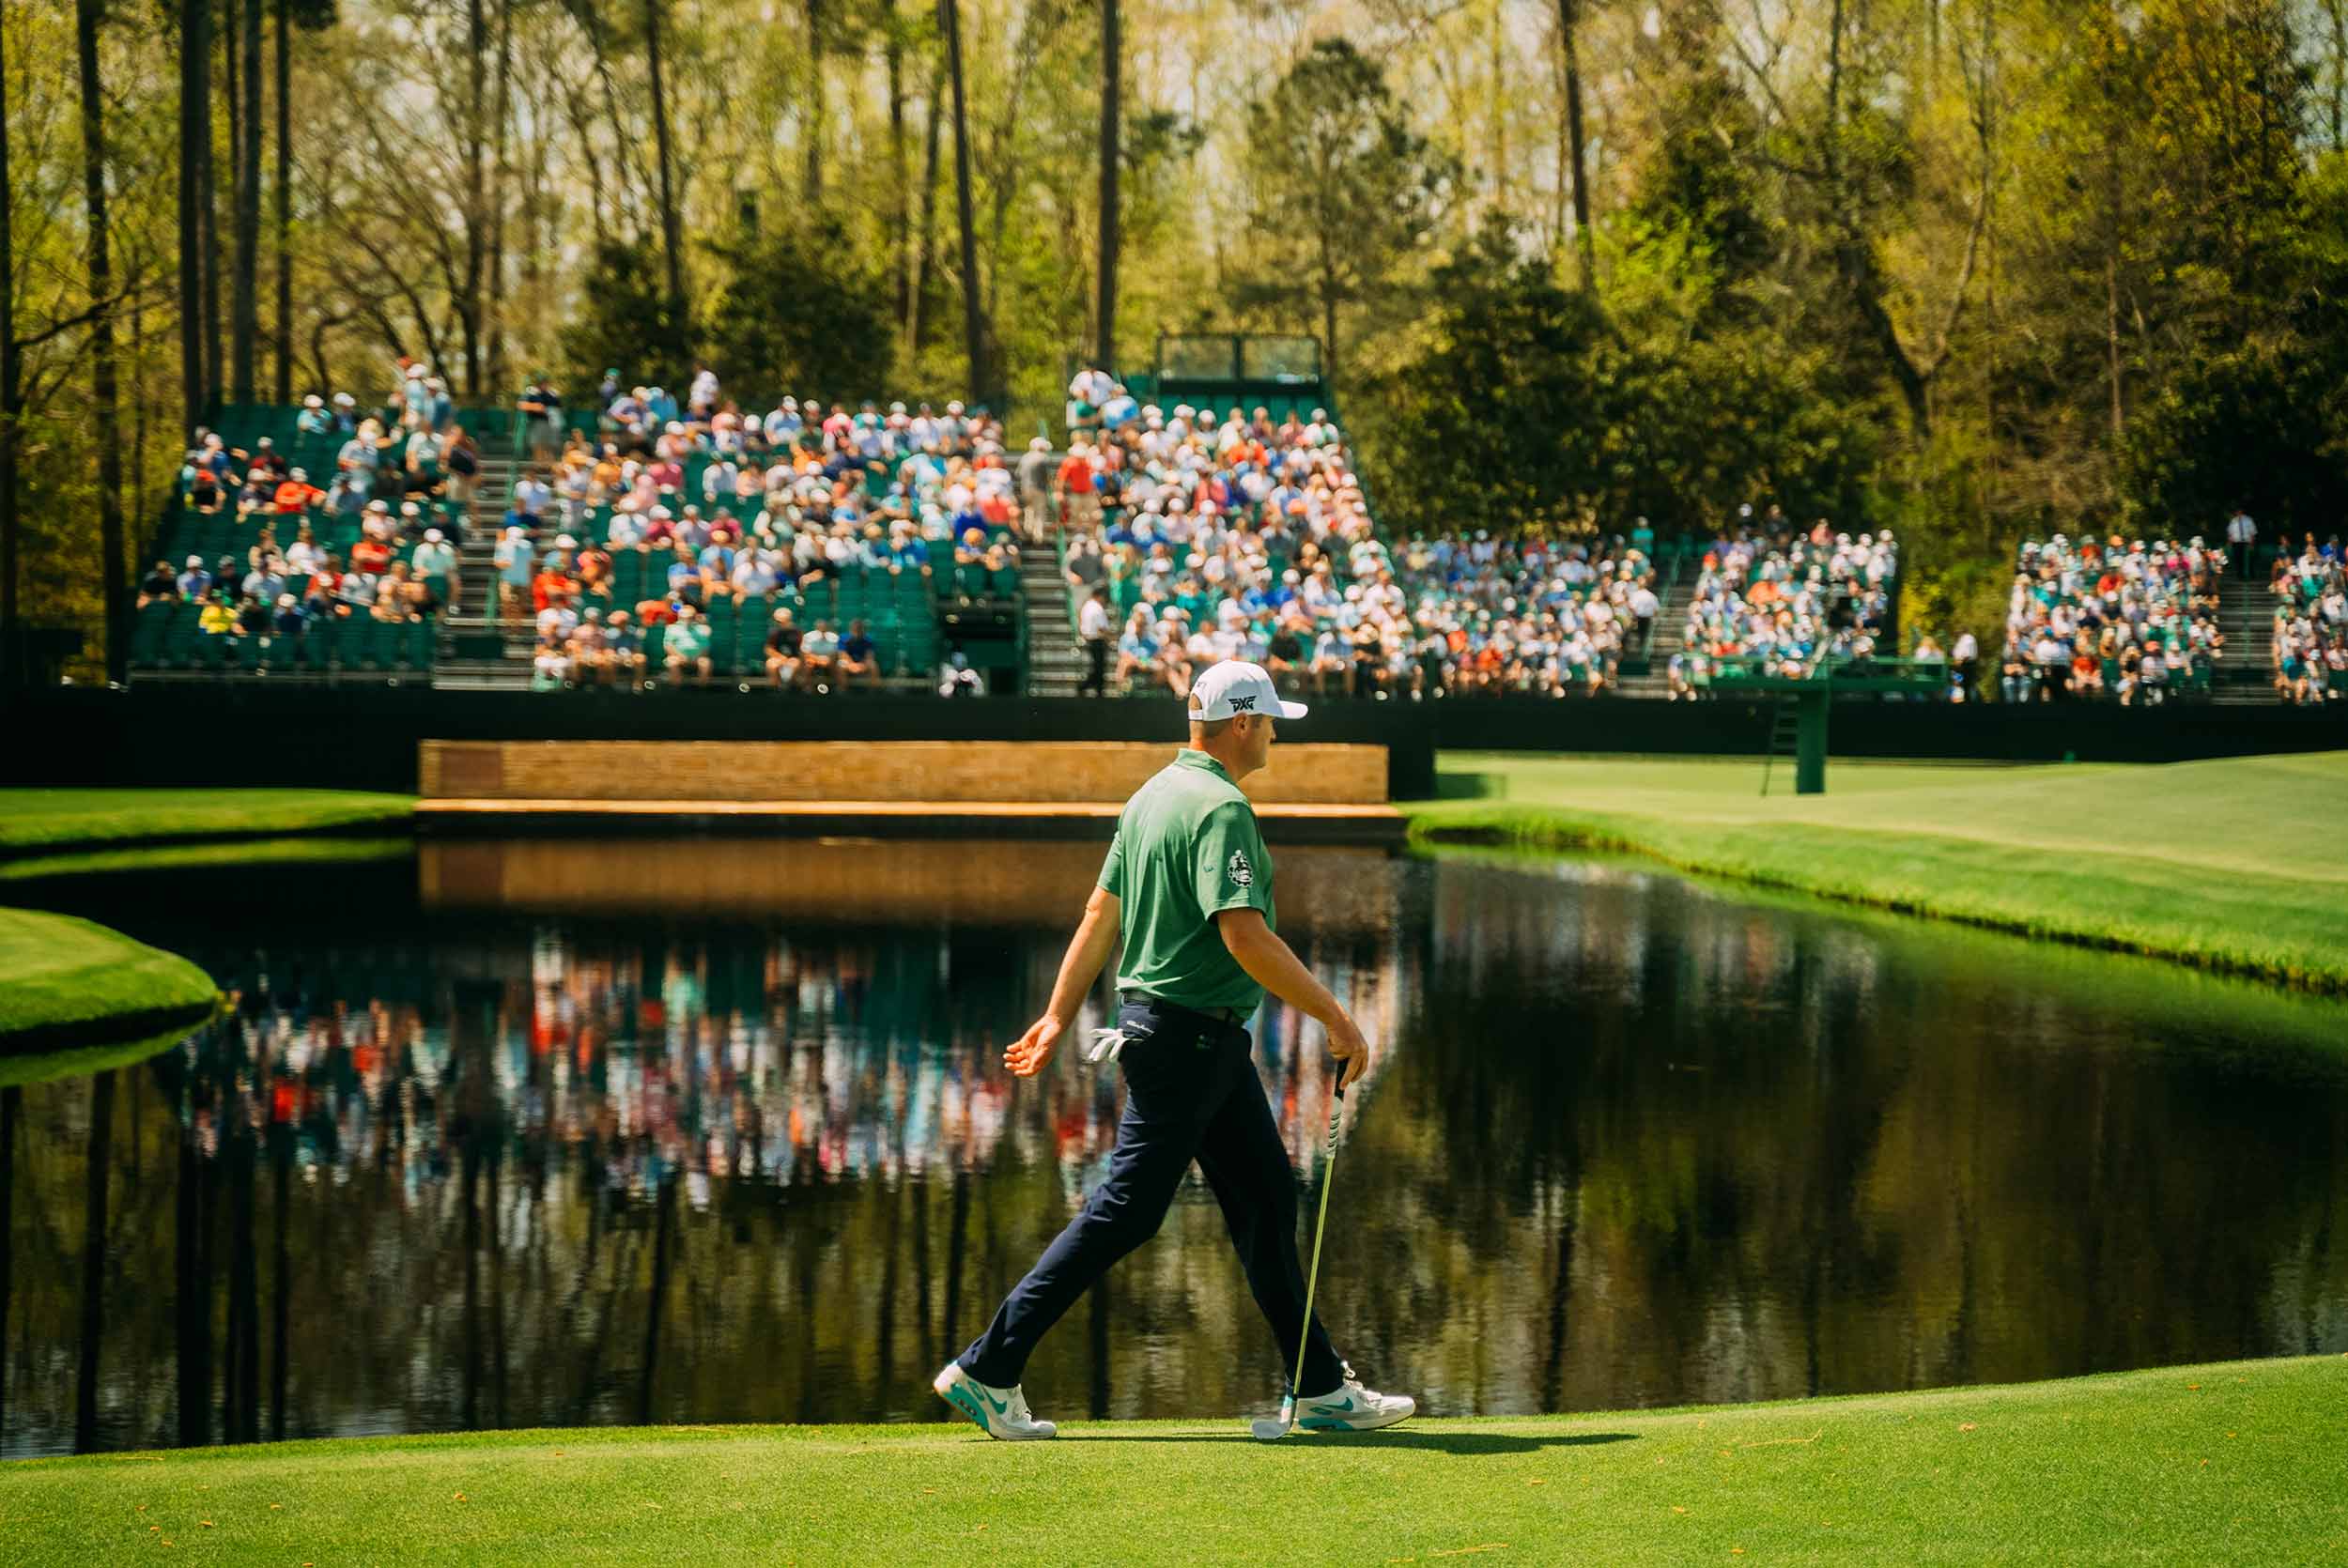 The Masters 2022